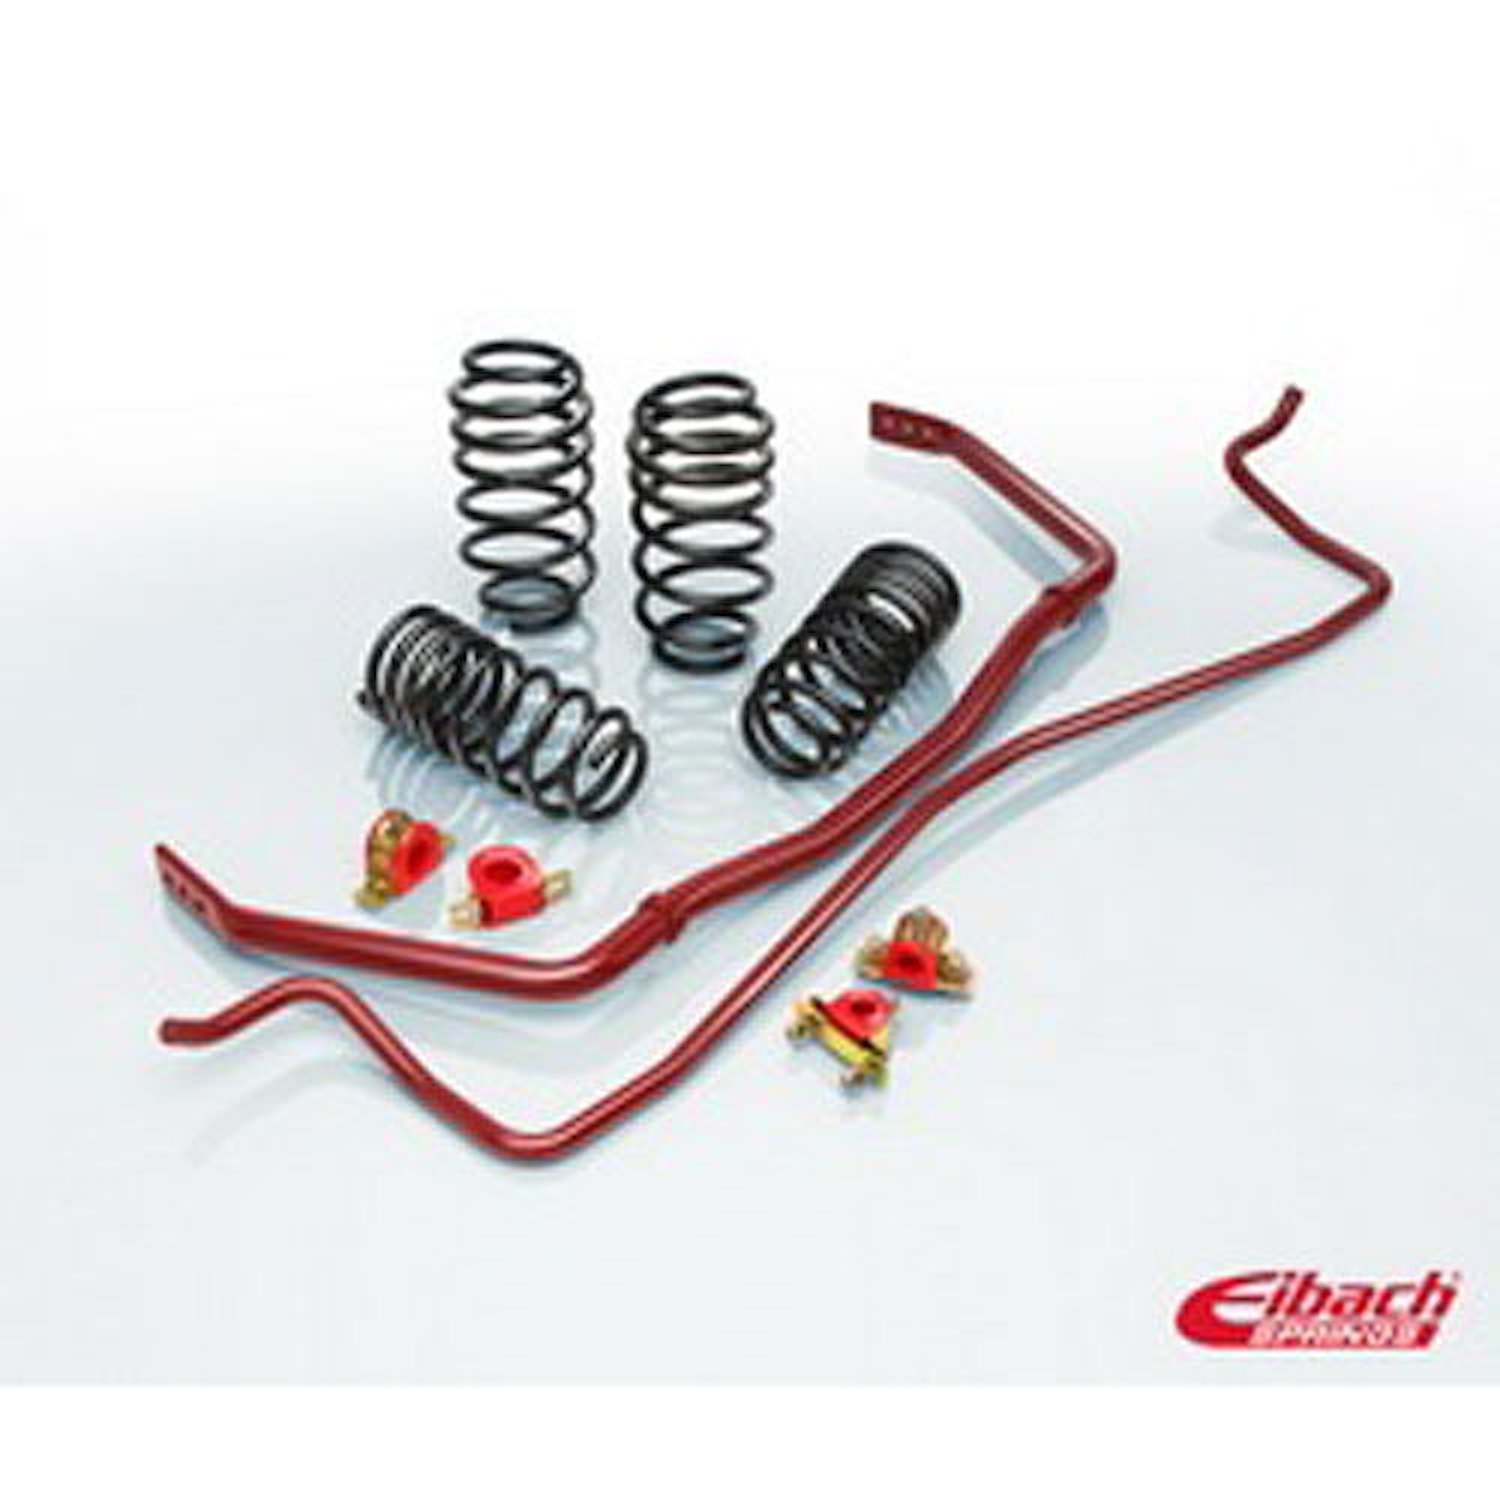 35101.880 Pro-Plus Suspension System 2005-2010 Mustang V8/2010 V6 Coupe - 1.300 in. Front/1.400 in. Rear Drop